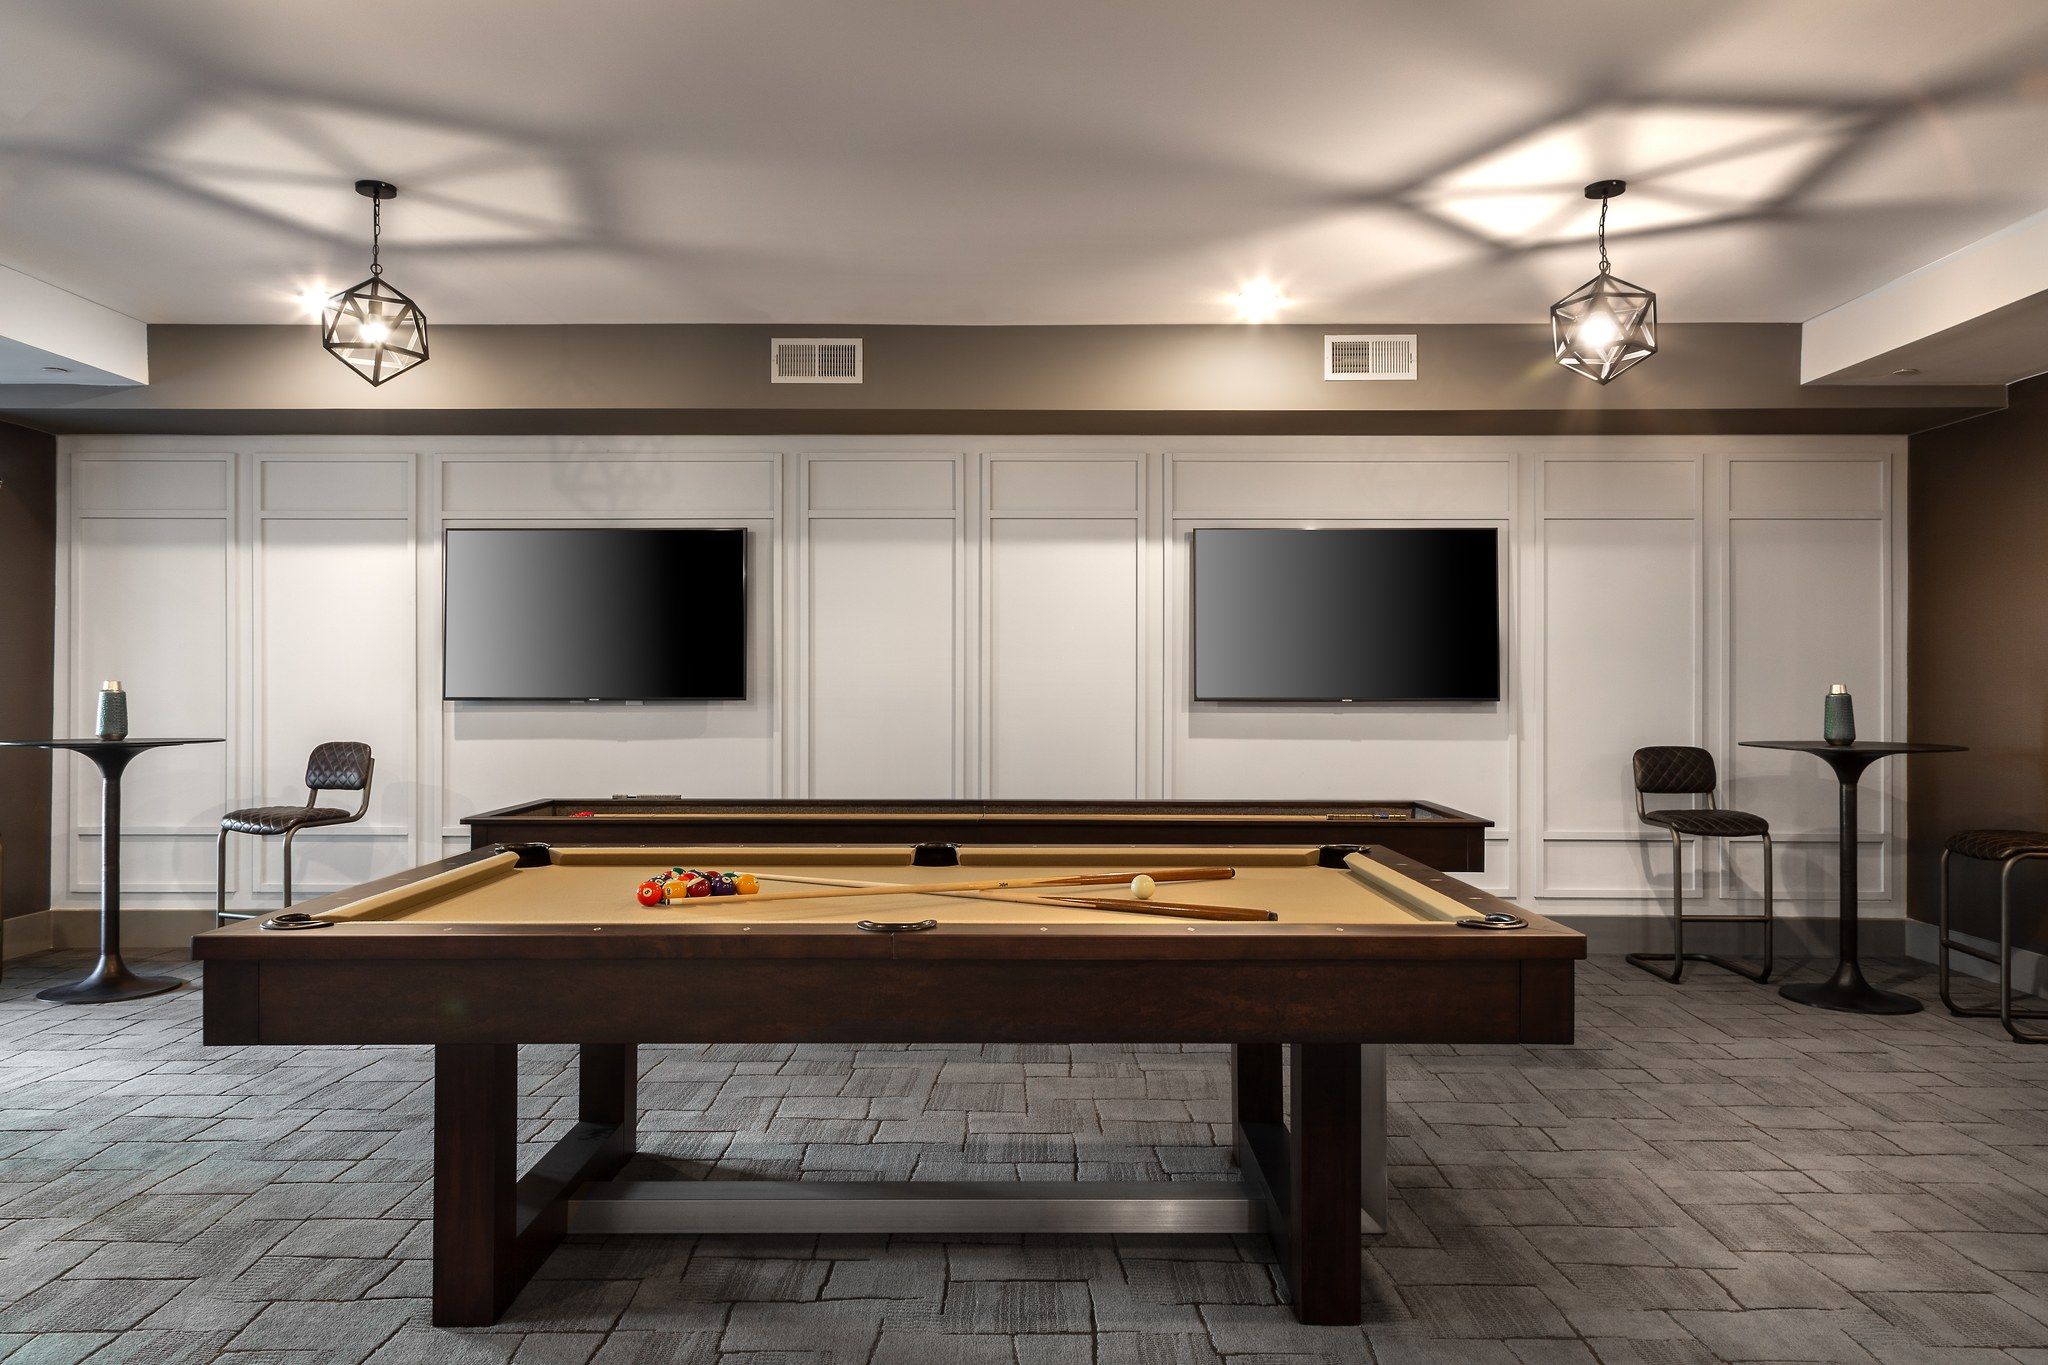 Billiards table in game room for residents at Providence Row Apartments